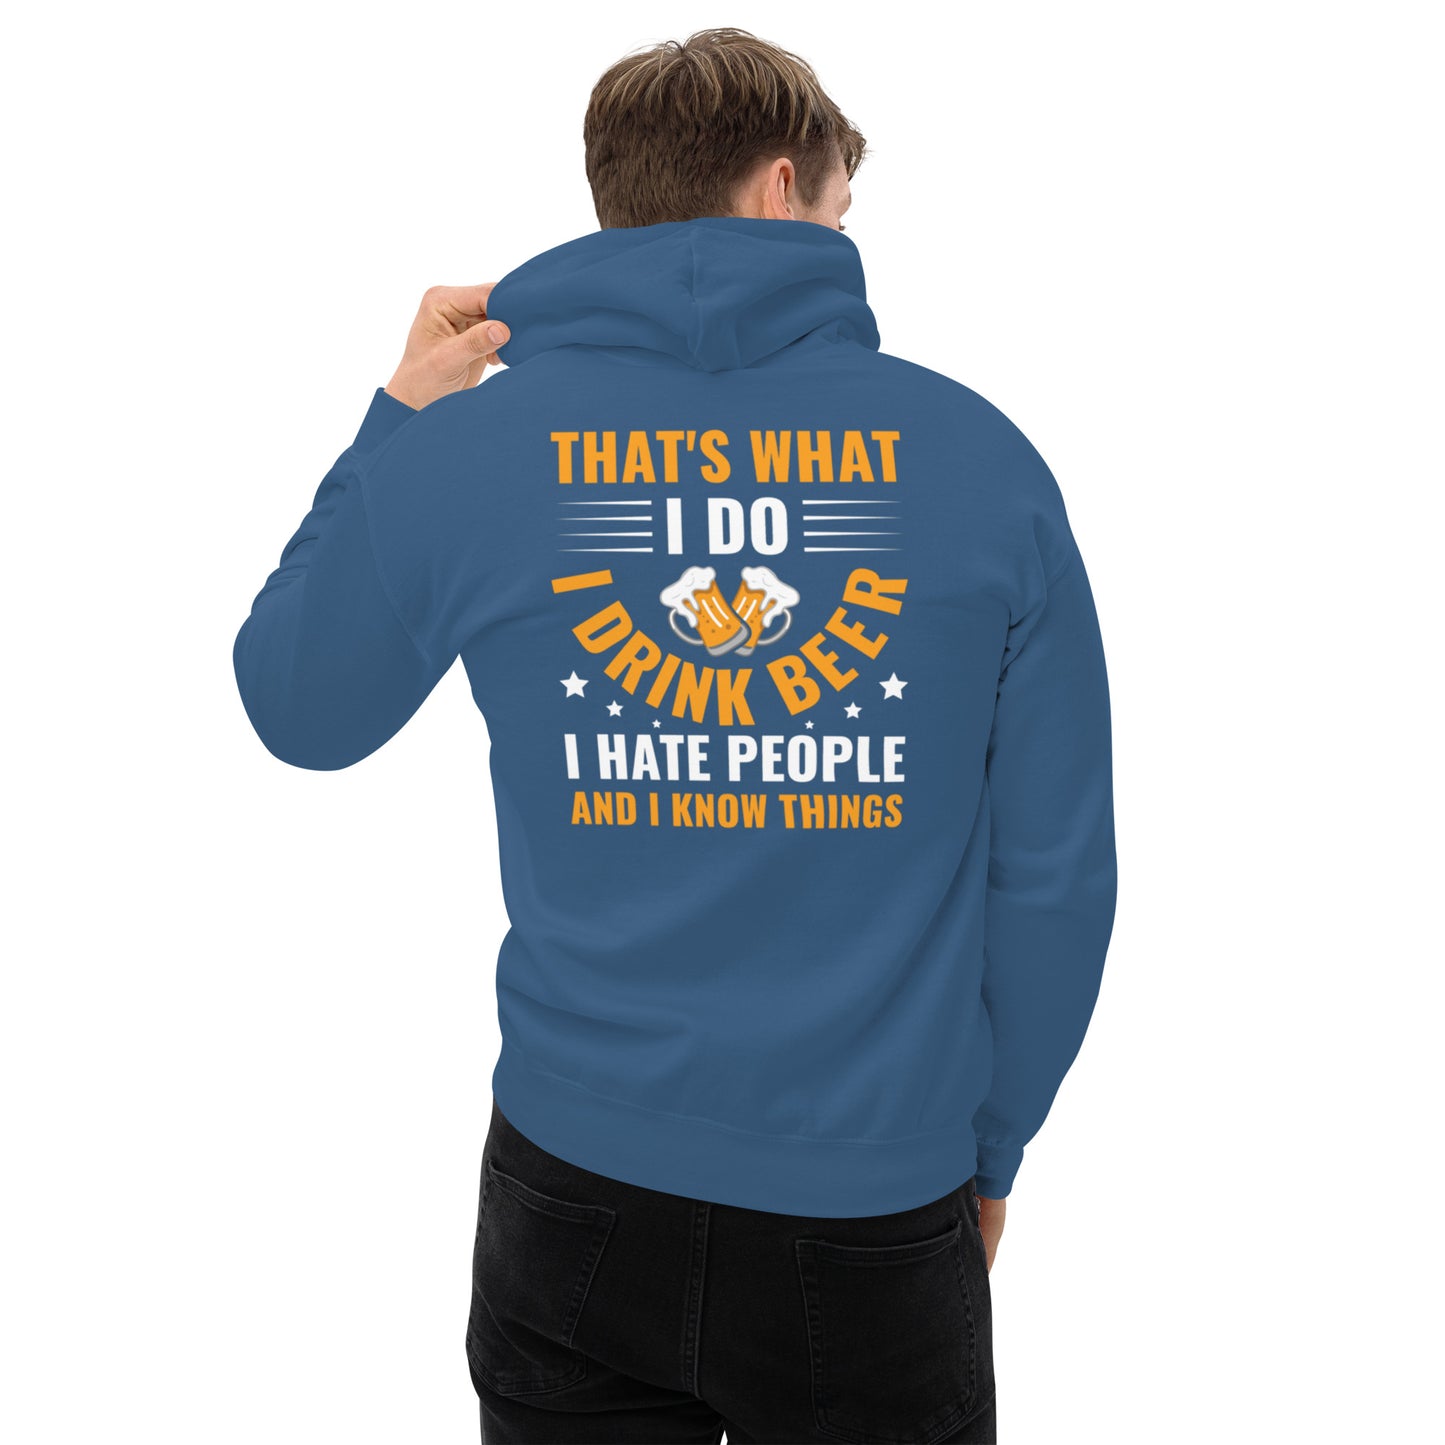 That's What I Do, I Drink Beer, I Hate People, and I Know Things Unisex Hoodie